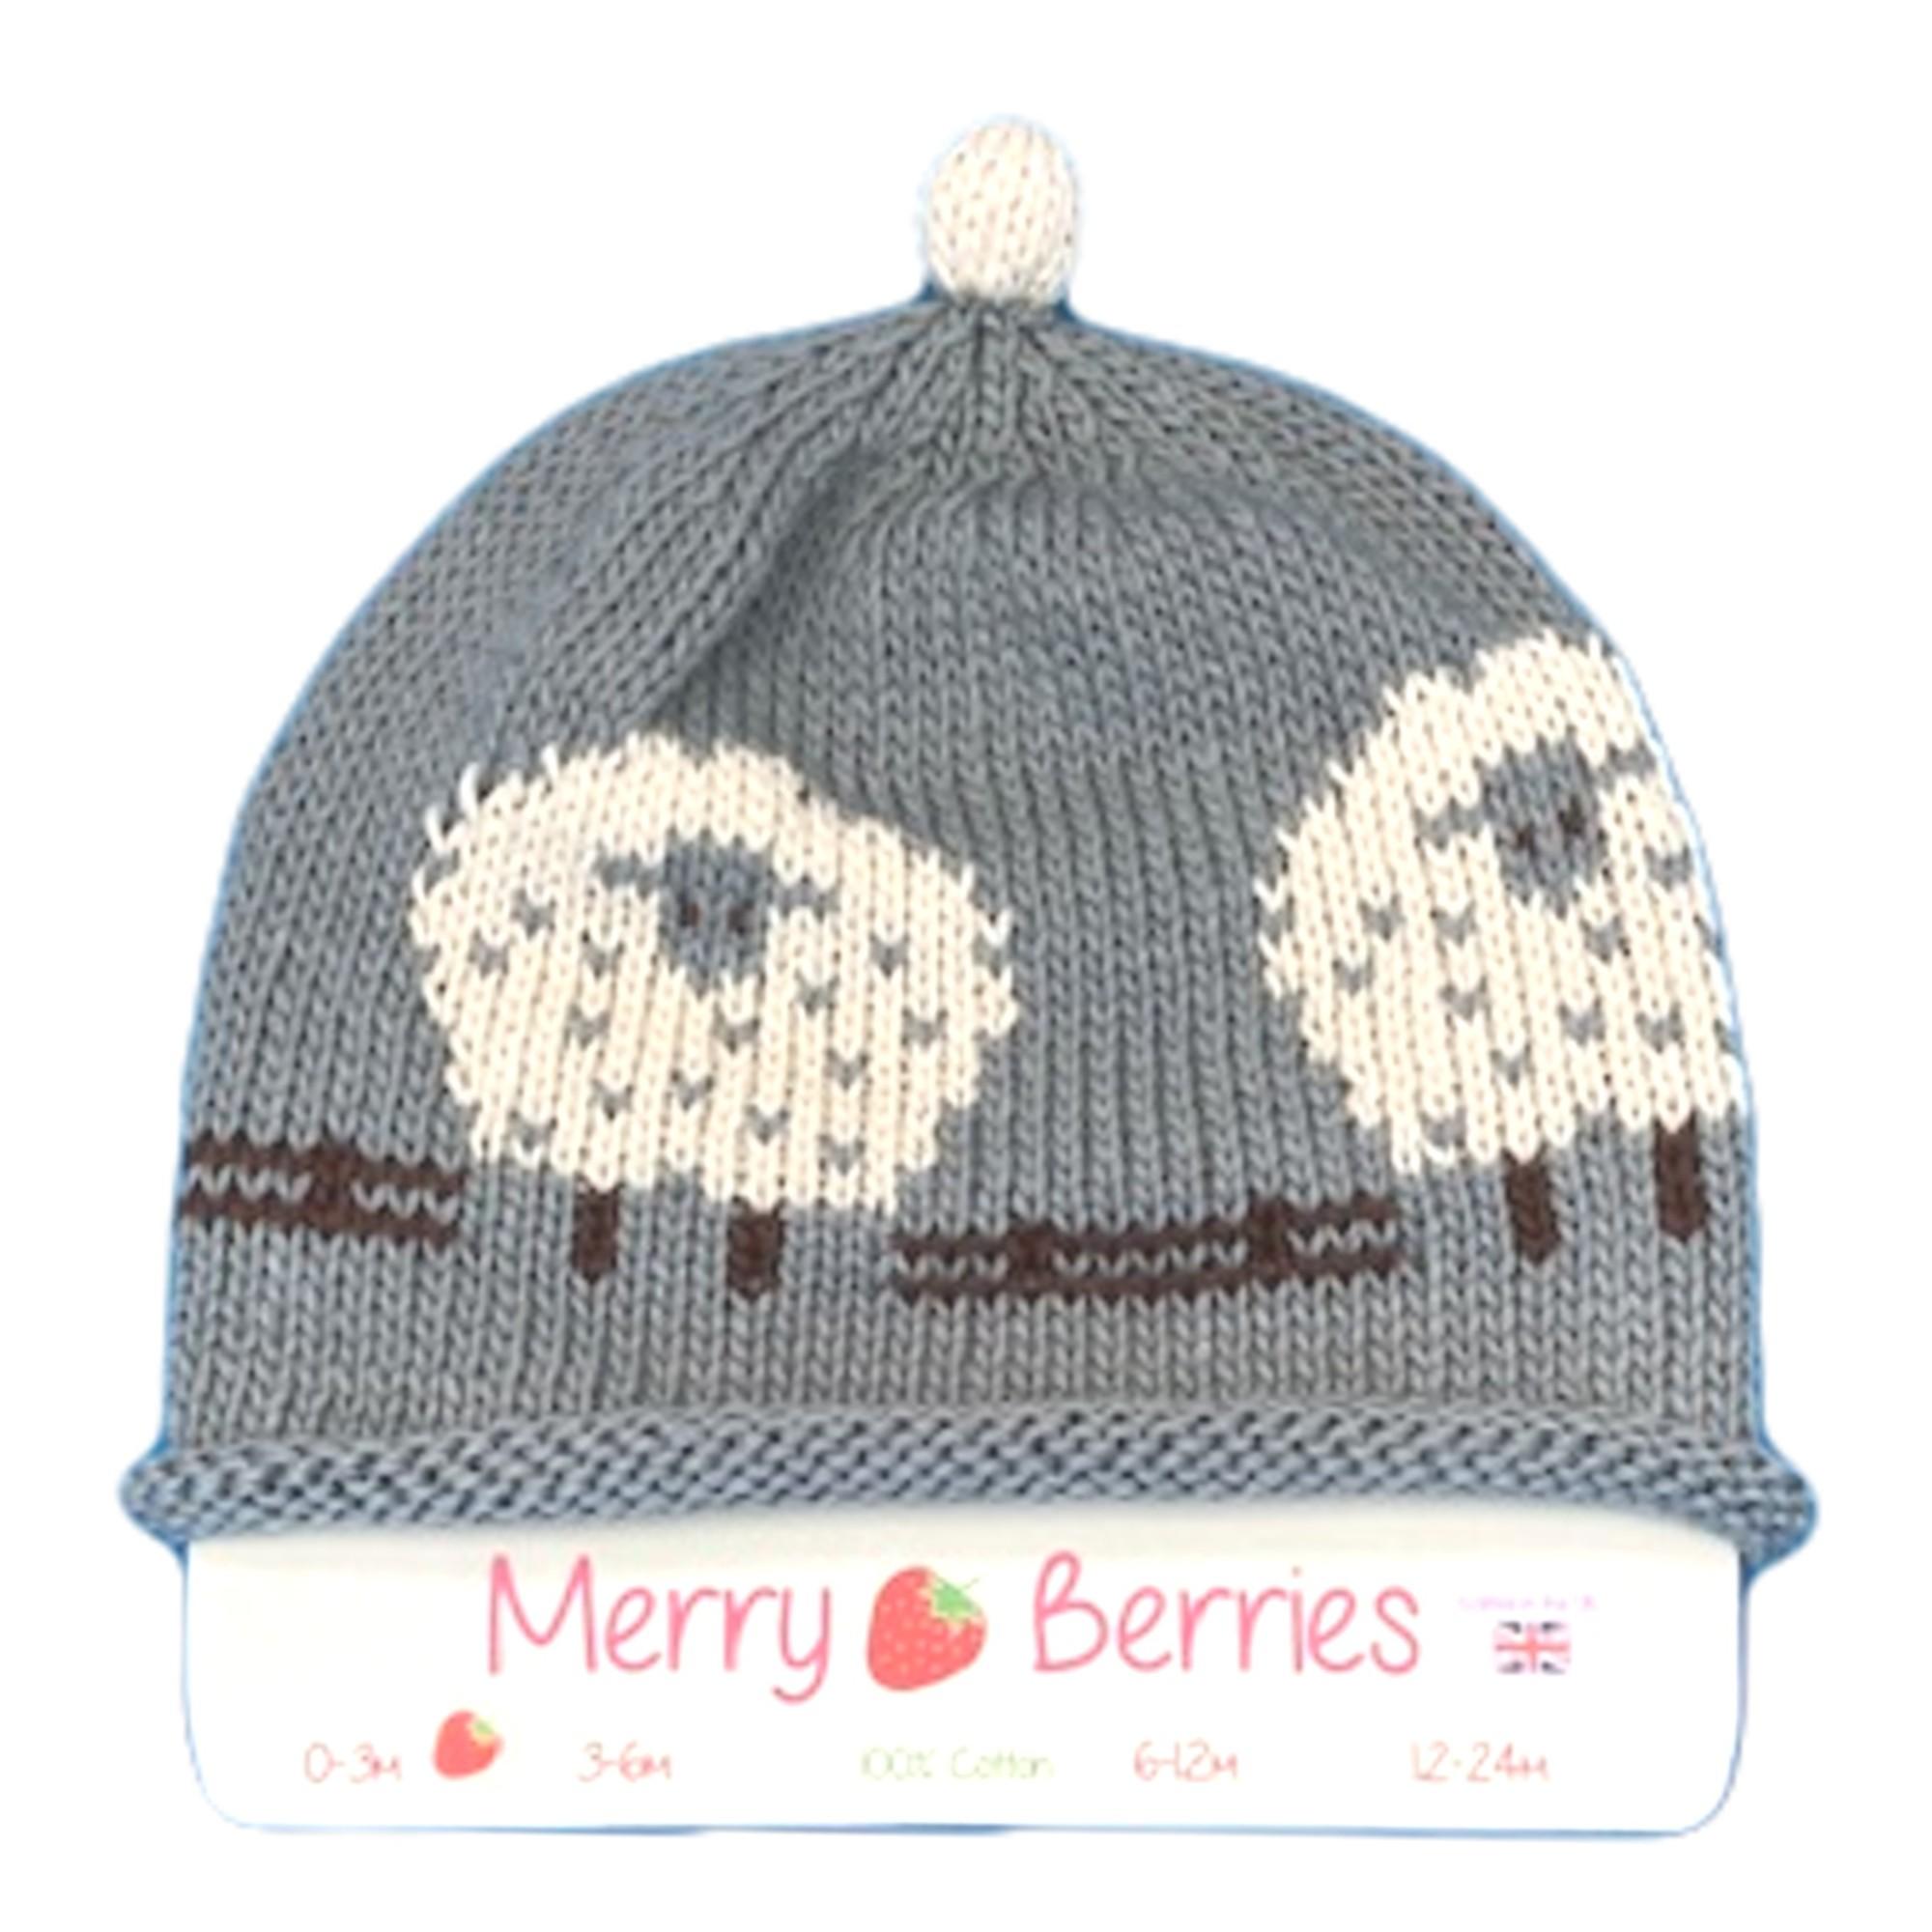 Merry Berries- Grey Sheep Knitted Baby Hat- 0-24 Months- Cotton